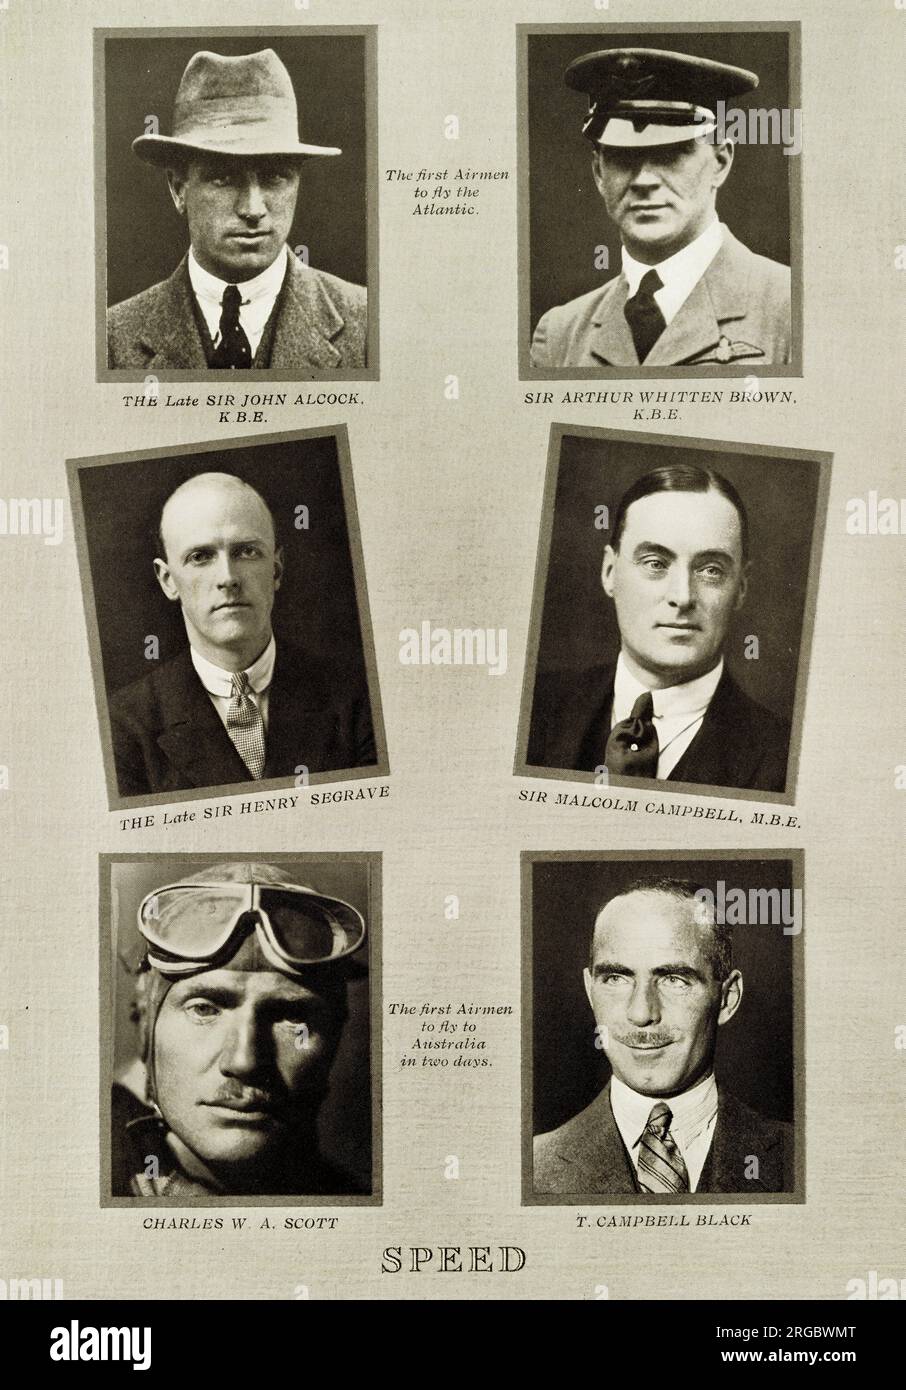 Pioneers in Land and Air Speed during the first 25 years of the reign of King George V: Alcock, Brown, Segrave, Campbell, Scott, Campbell Black. Stock Photo